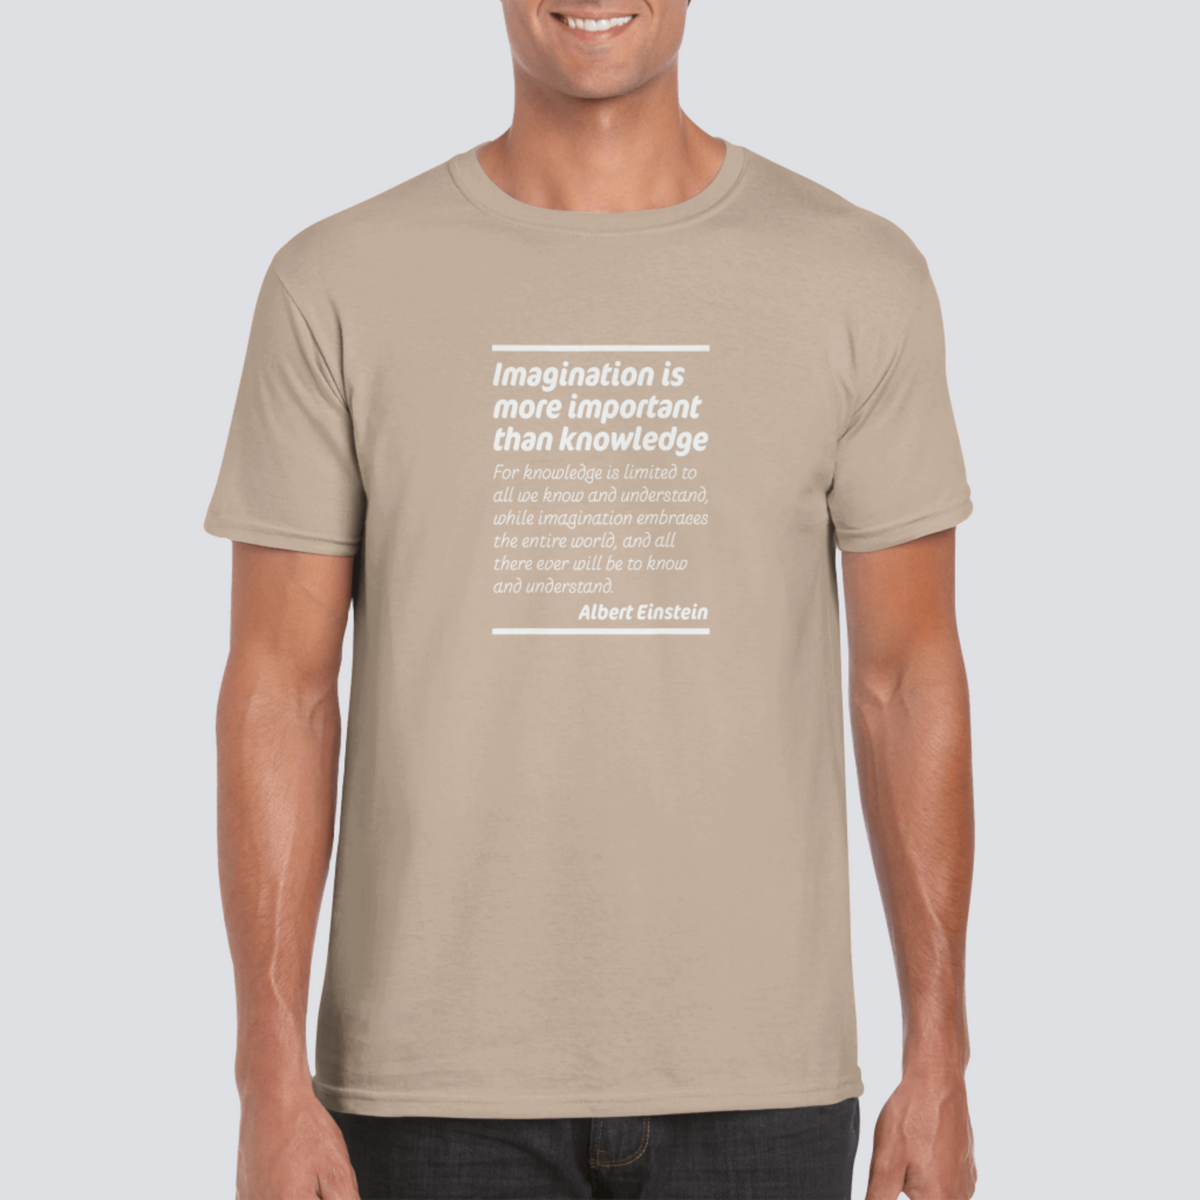 Mens Imagination Is More Important Than Knowledge sand t shirt - MangoBap